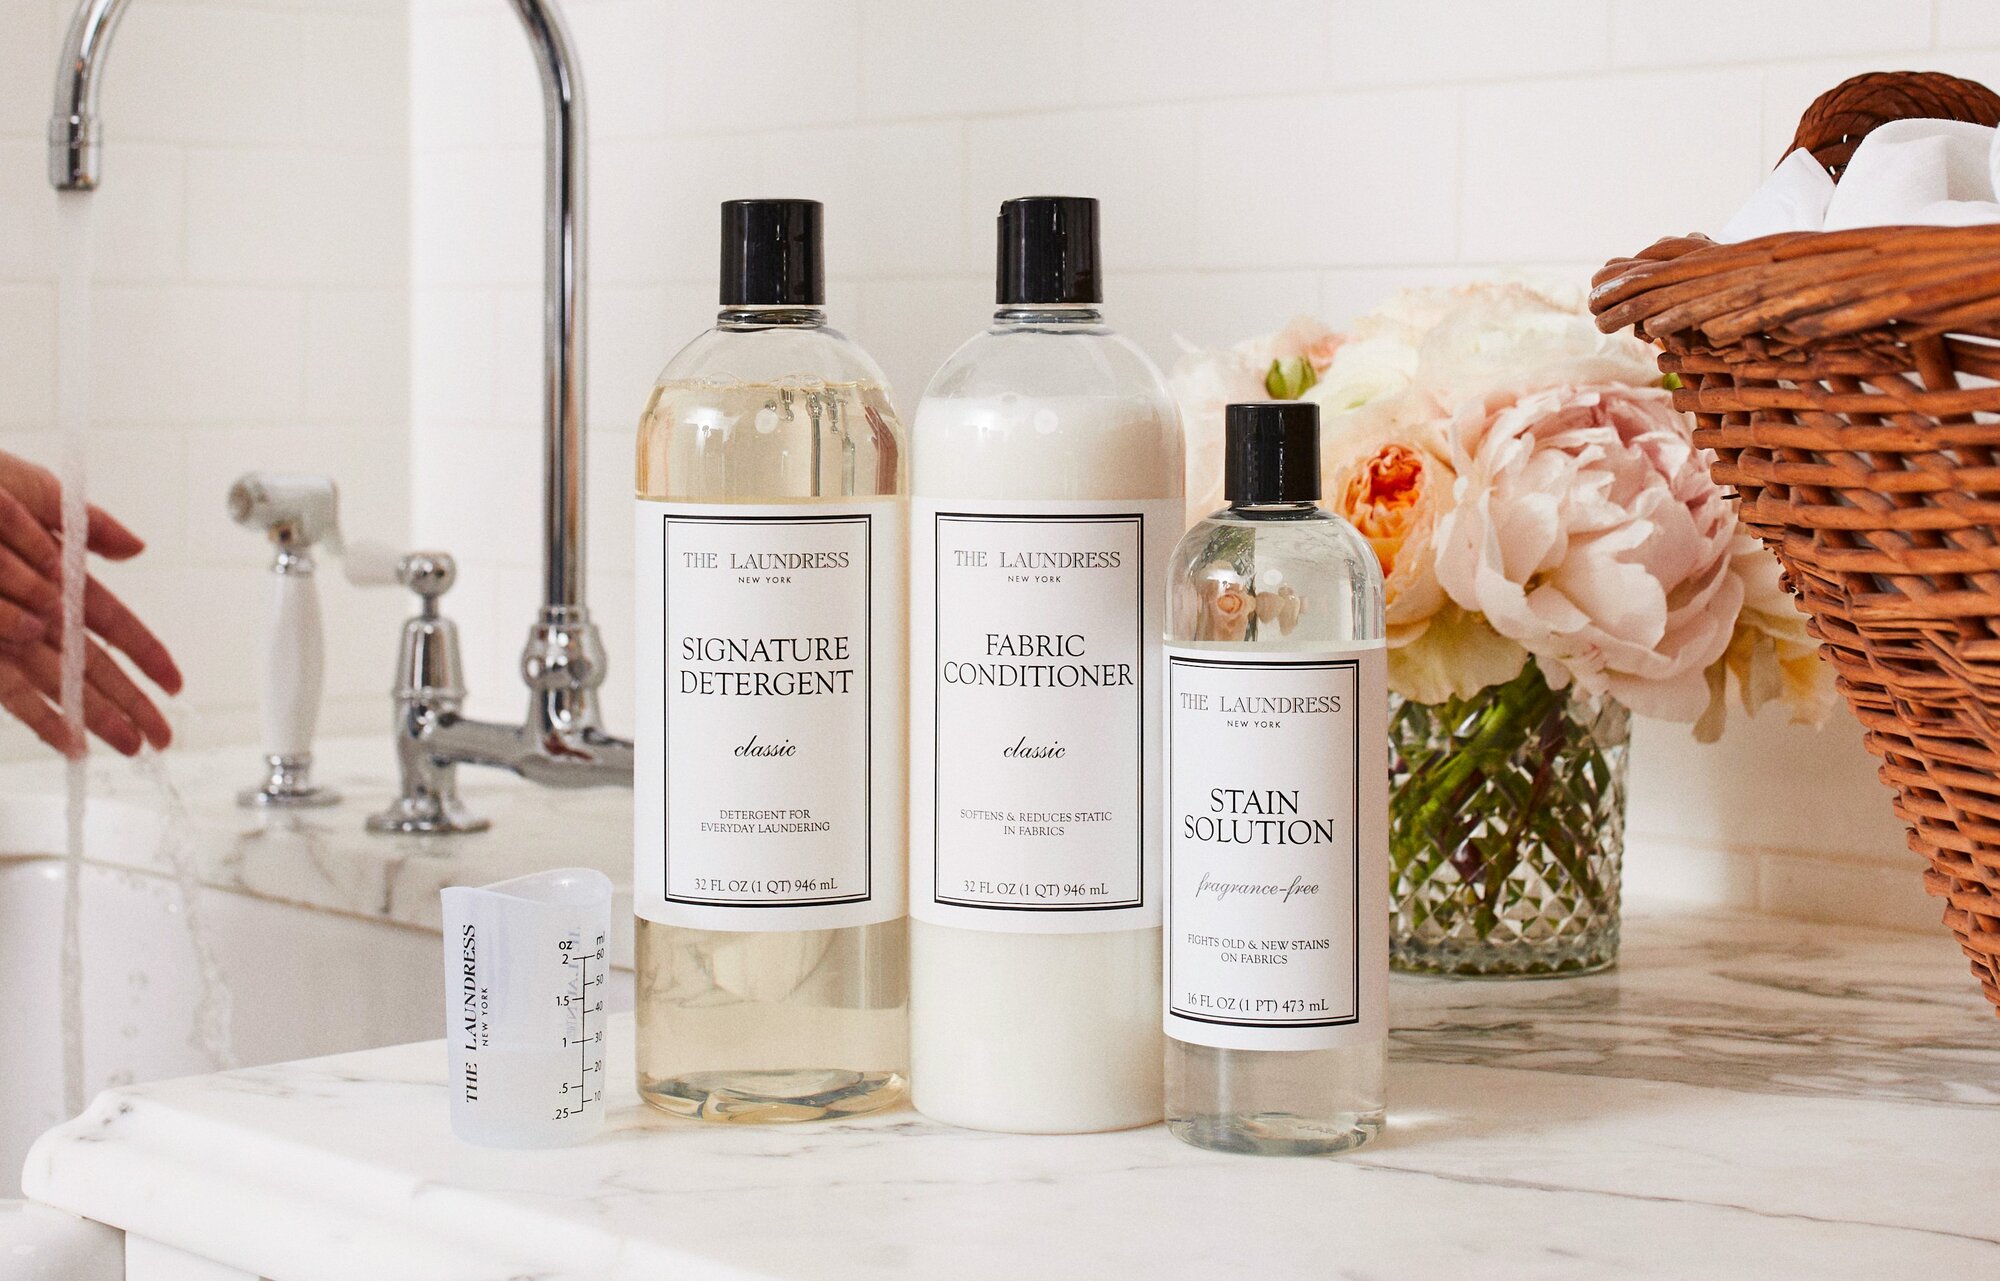 the laundress signature detergent, fabric conditioner, and stain solution wash routine for fabrics